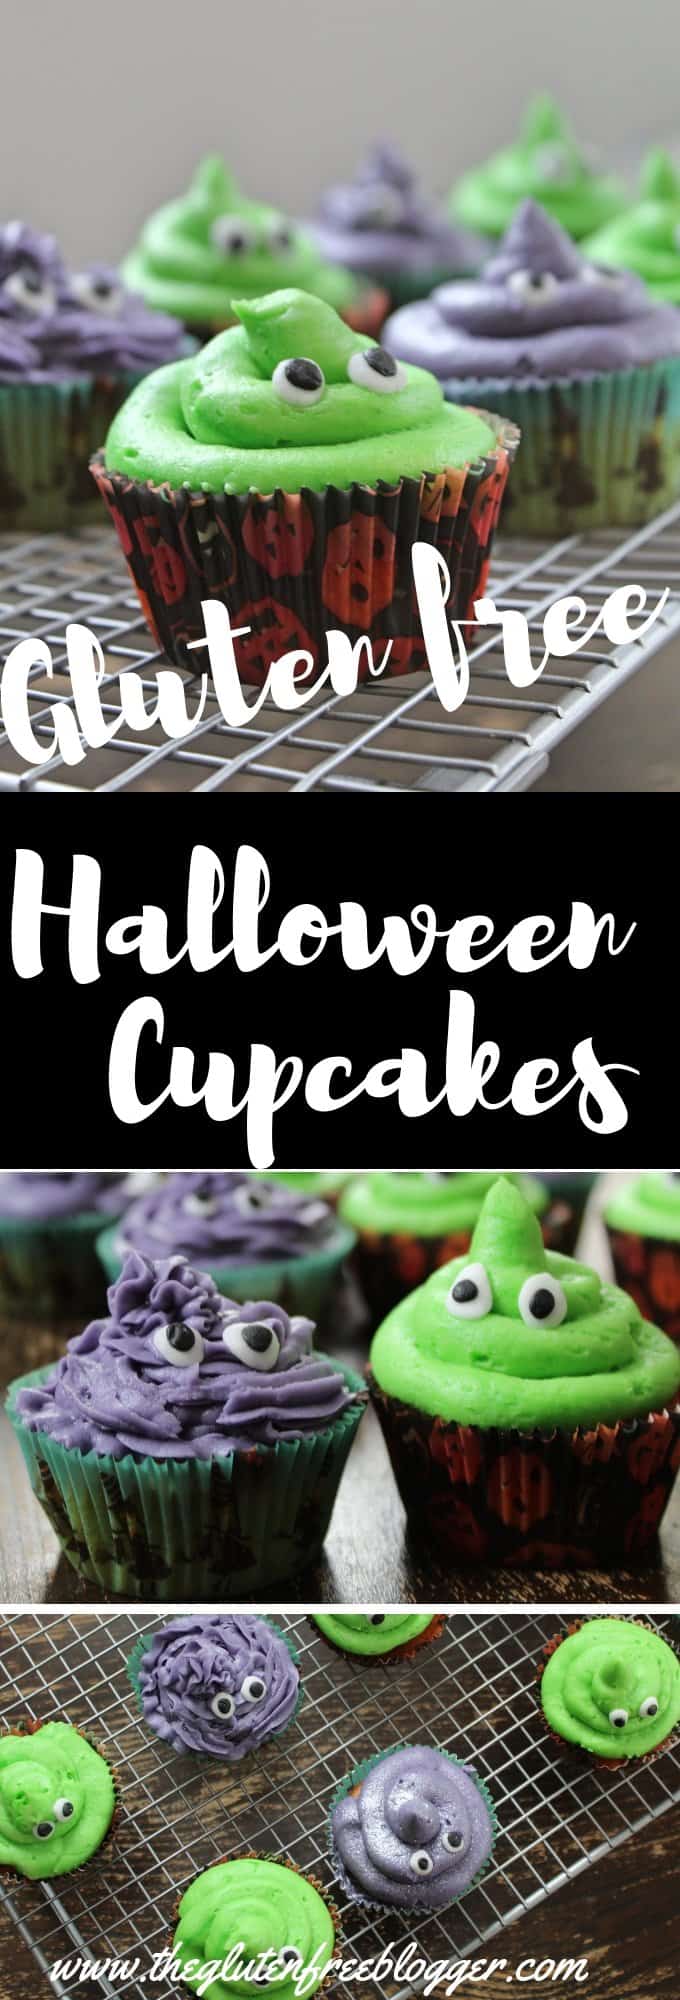 gluten free halloween cupcakes - monster cupcakes - dairy free - halloween party food - recipe